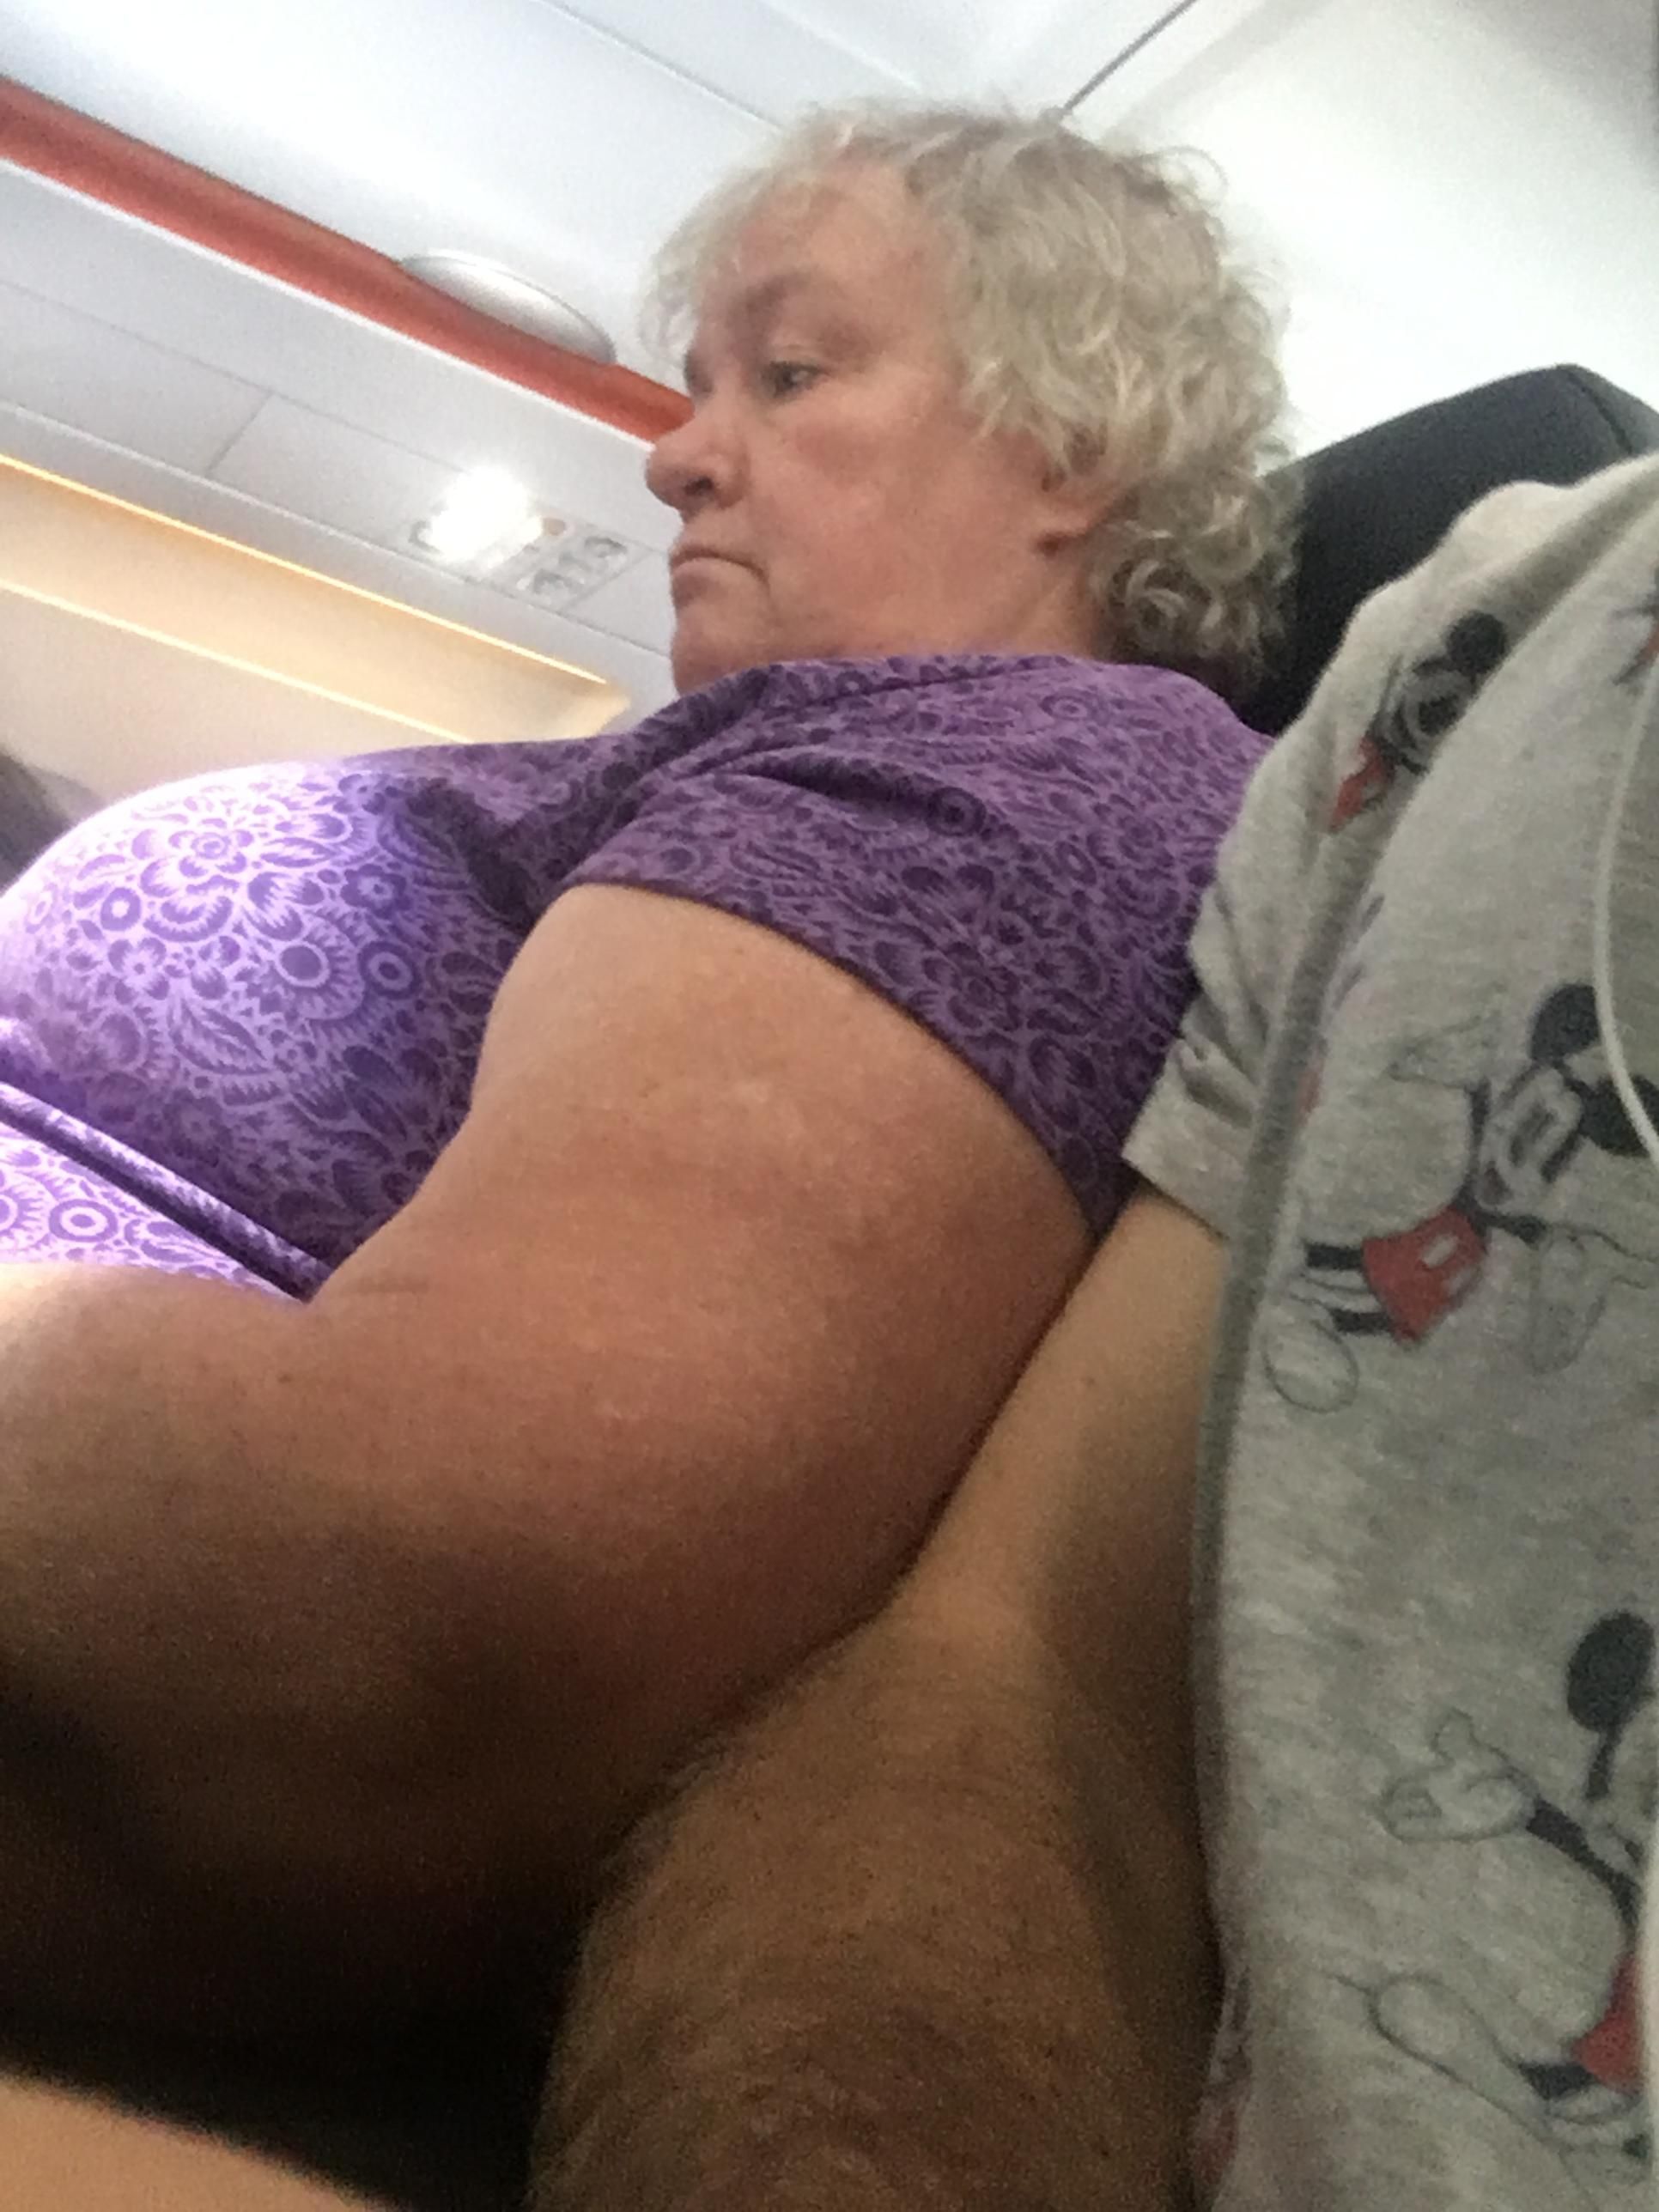 When asked if she could try to keep to her own seat, she suggested I scoot closer to my wife, since we had 'so much more space than her'.